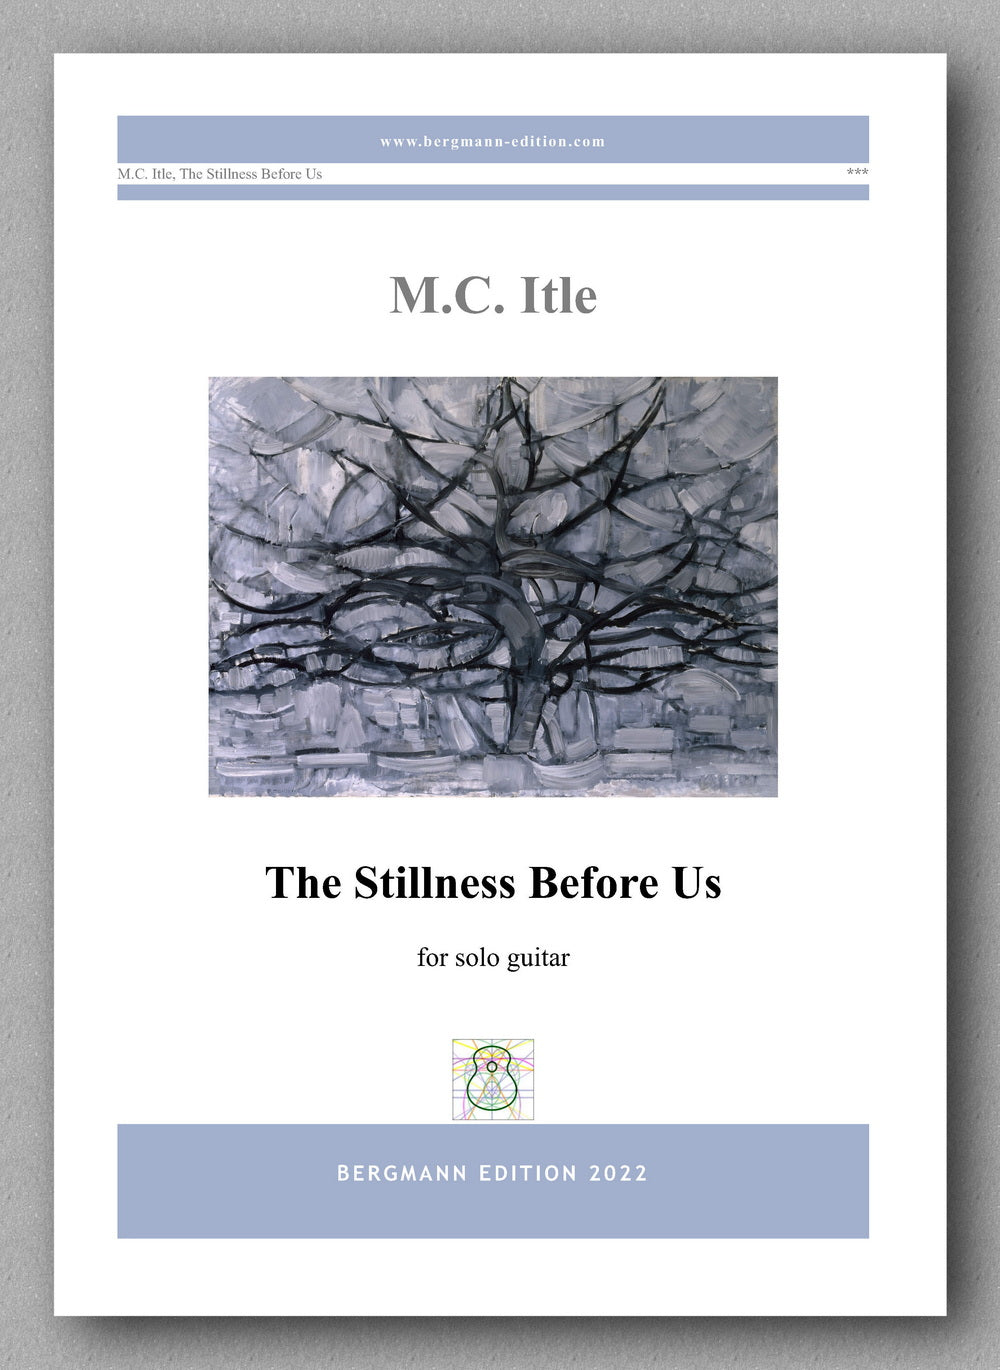 Michael C. Itle, The Stillness Before Us - preview of the cover